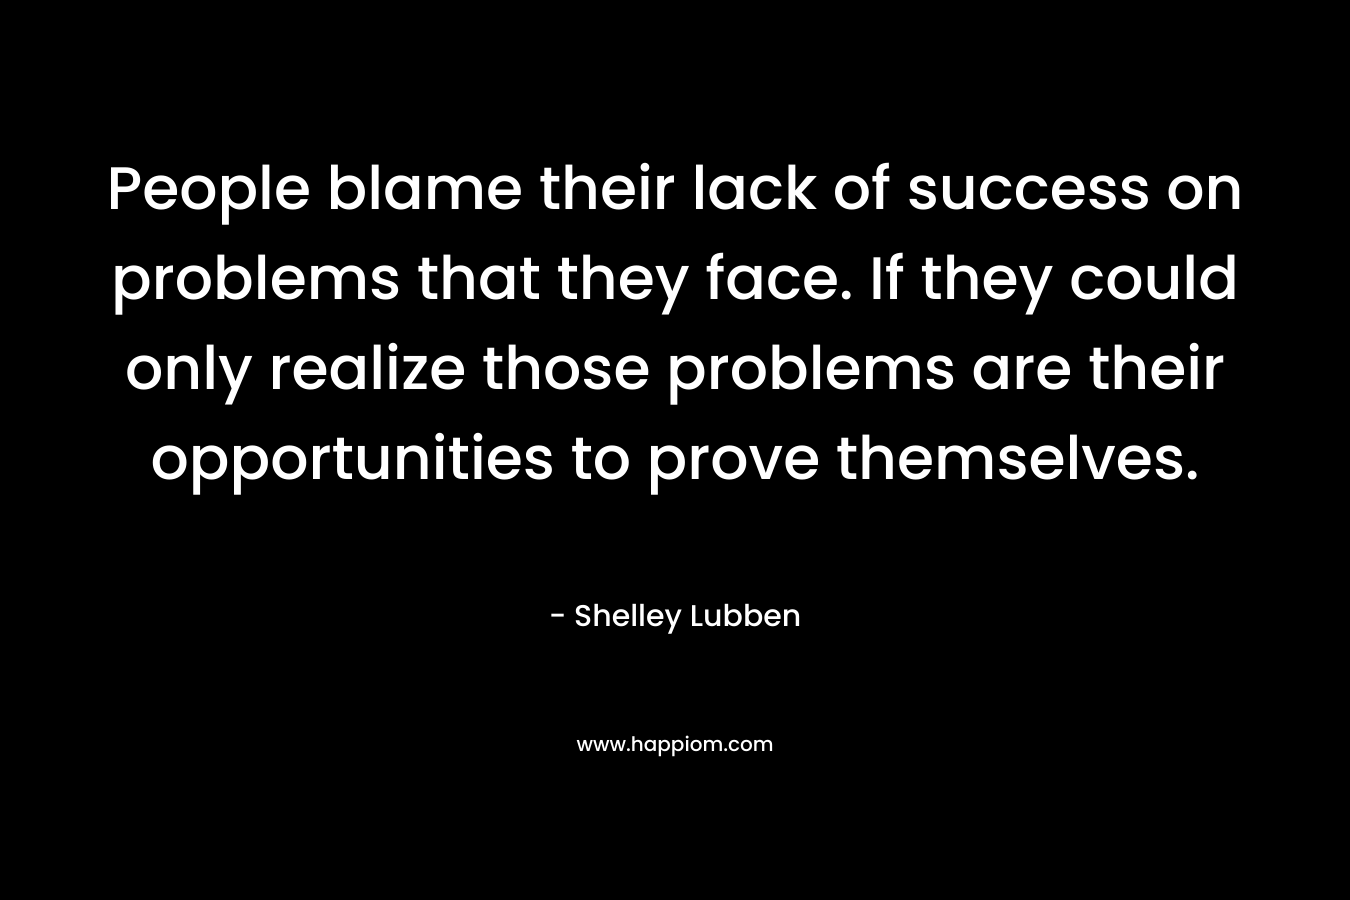 People blame their lack of success on problems that they face. If they could only realize those problems are their opportunities to prove themselves. – Shelley Lubben